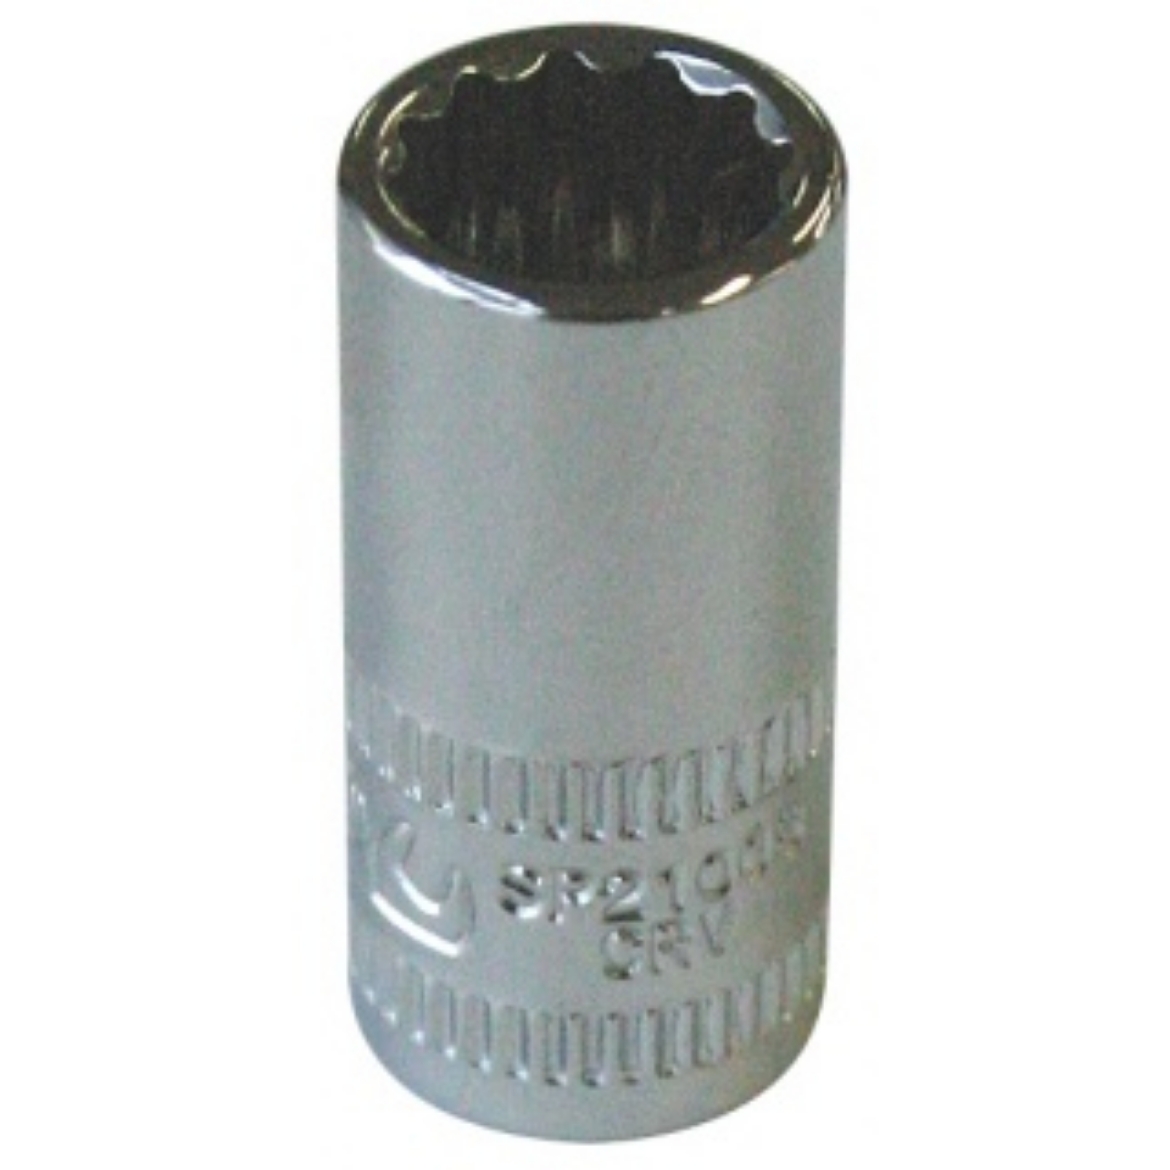 Picture of SOCKET 1/4"DR 12 PT METRIC 8MM SP TOOLS